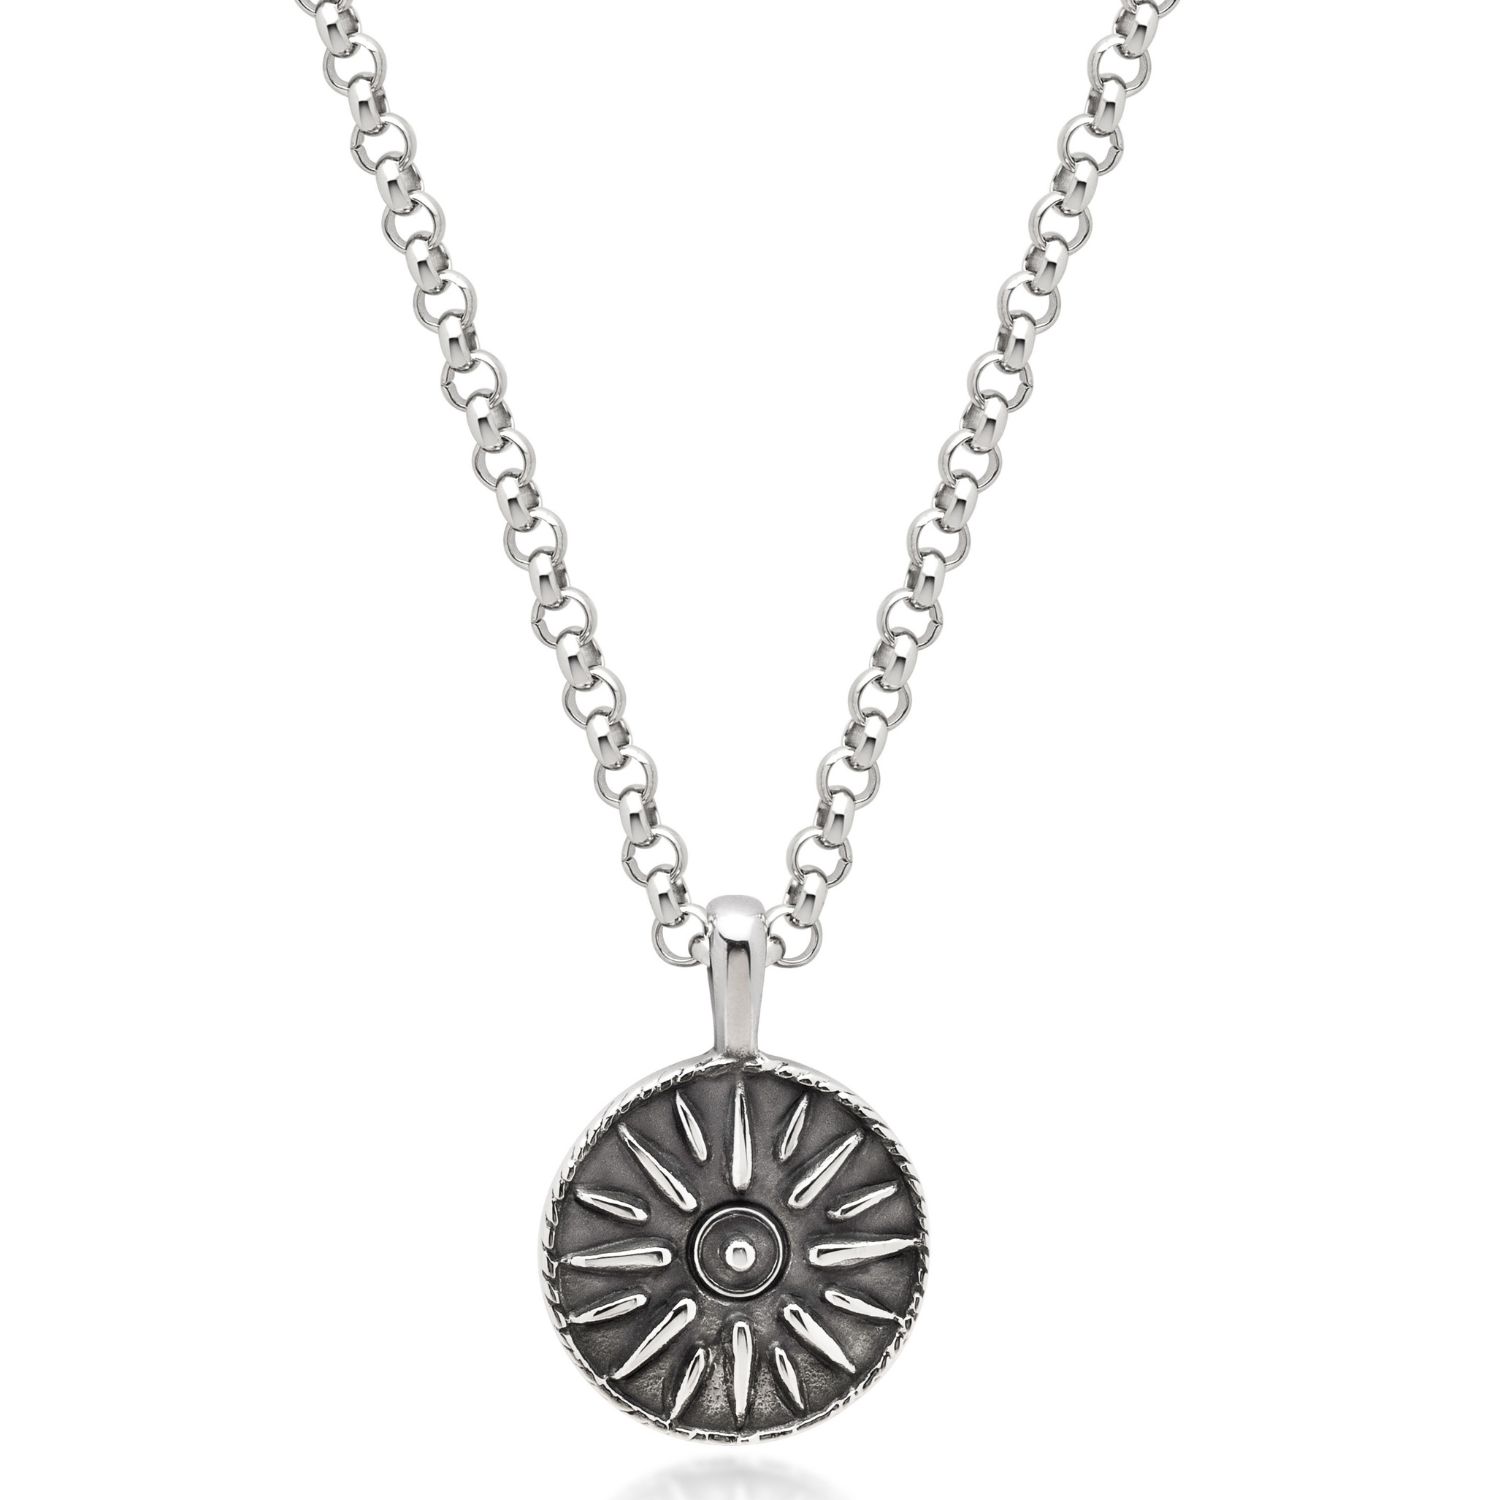 Nialaya Men's Silver Necklace With Ancient Sun Pendant In Metallic